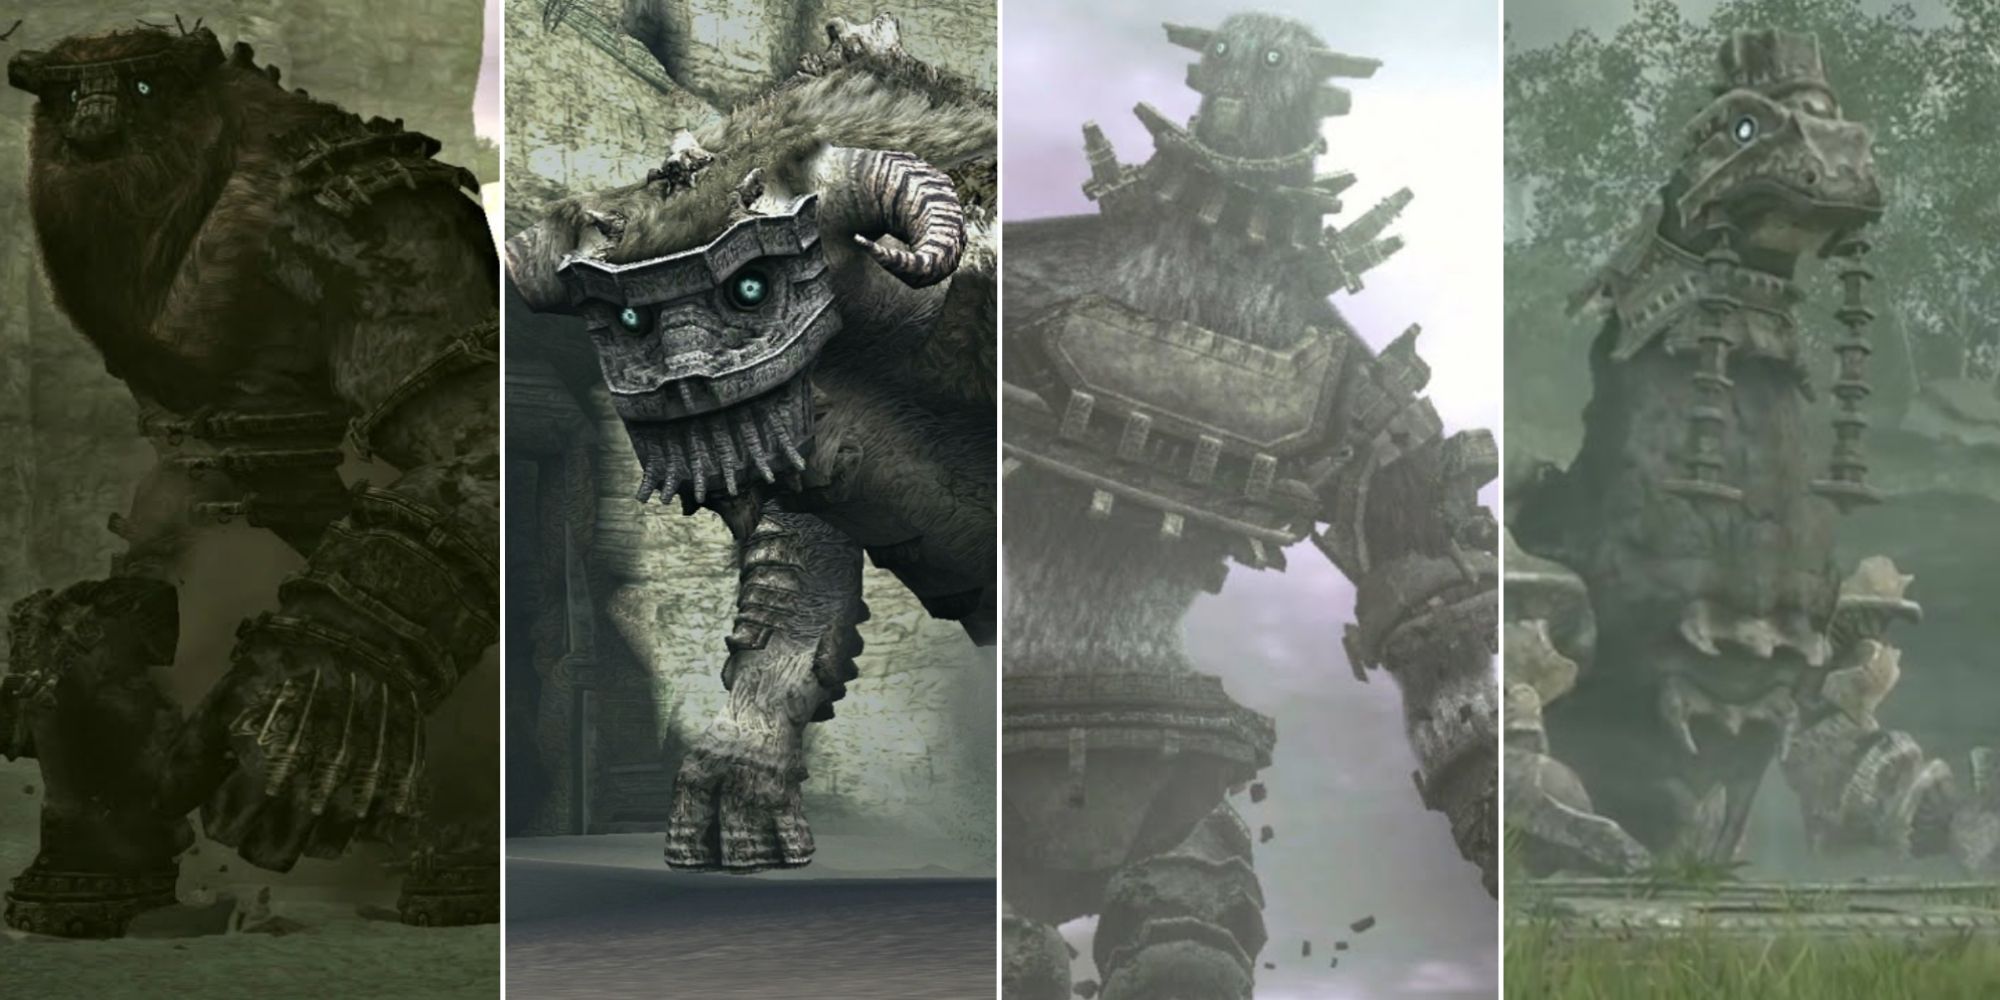 My Top Five Colossi in Shadow of the Colossus – The Triple Option